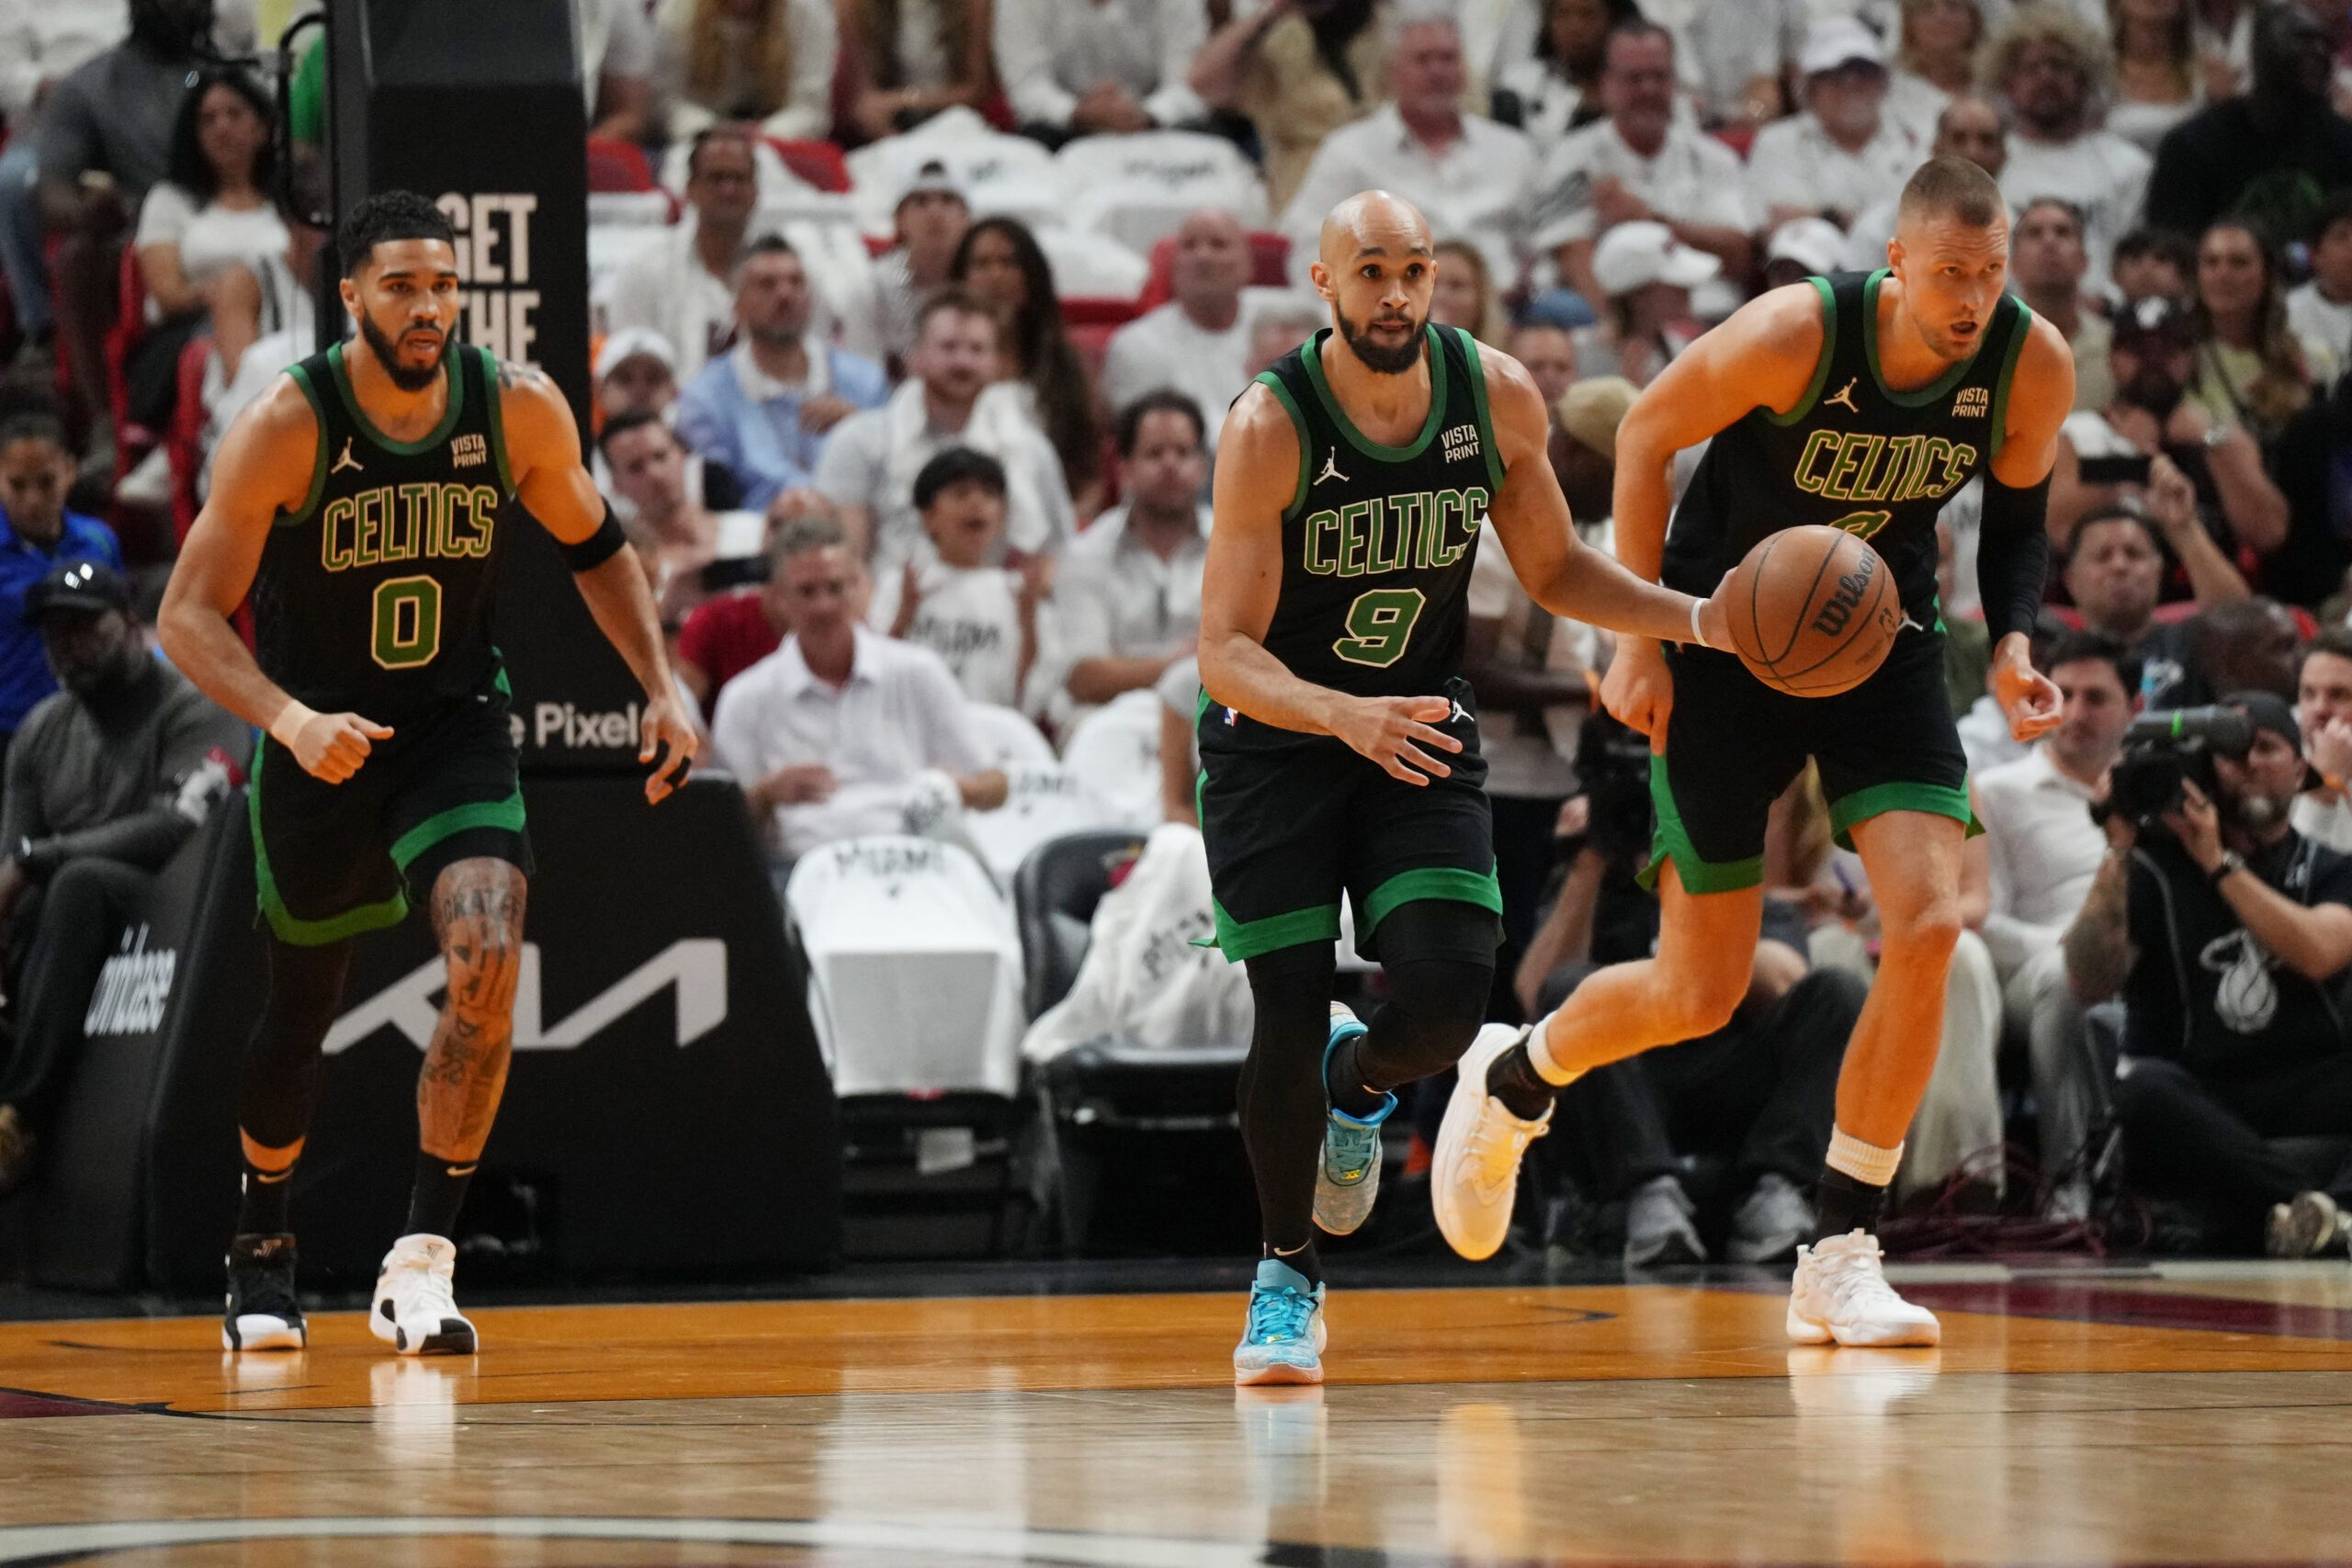 Red-hot White powers Celtics past Heat with 38 points, 8 threes; Porzingis goes down anew